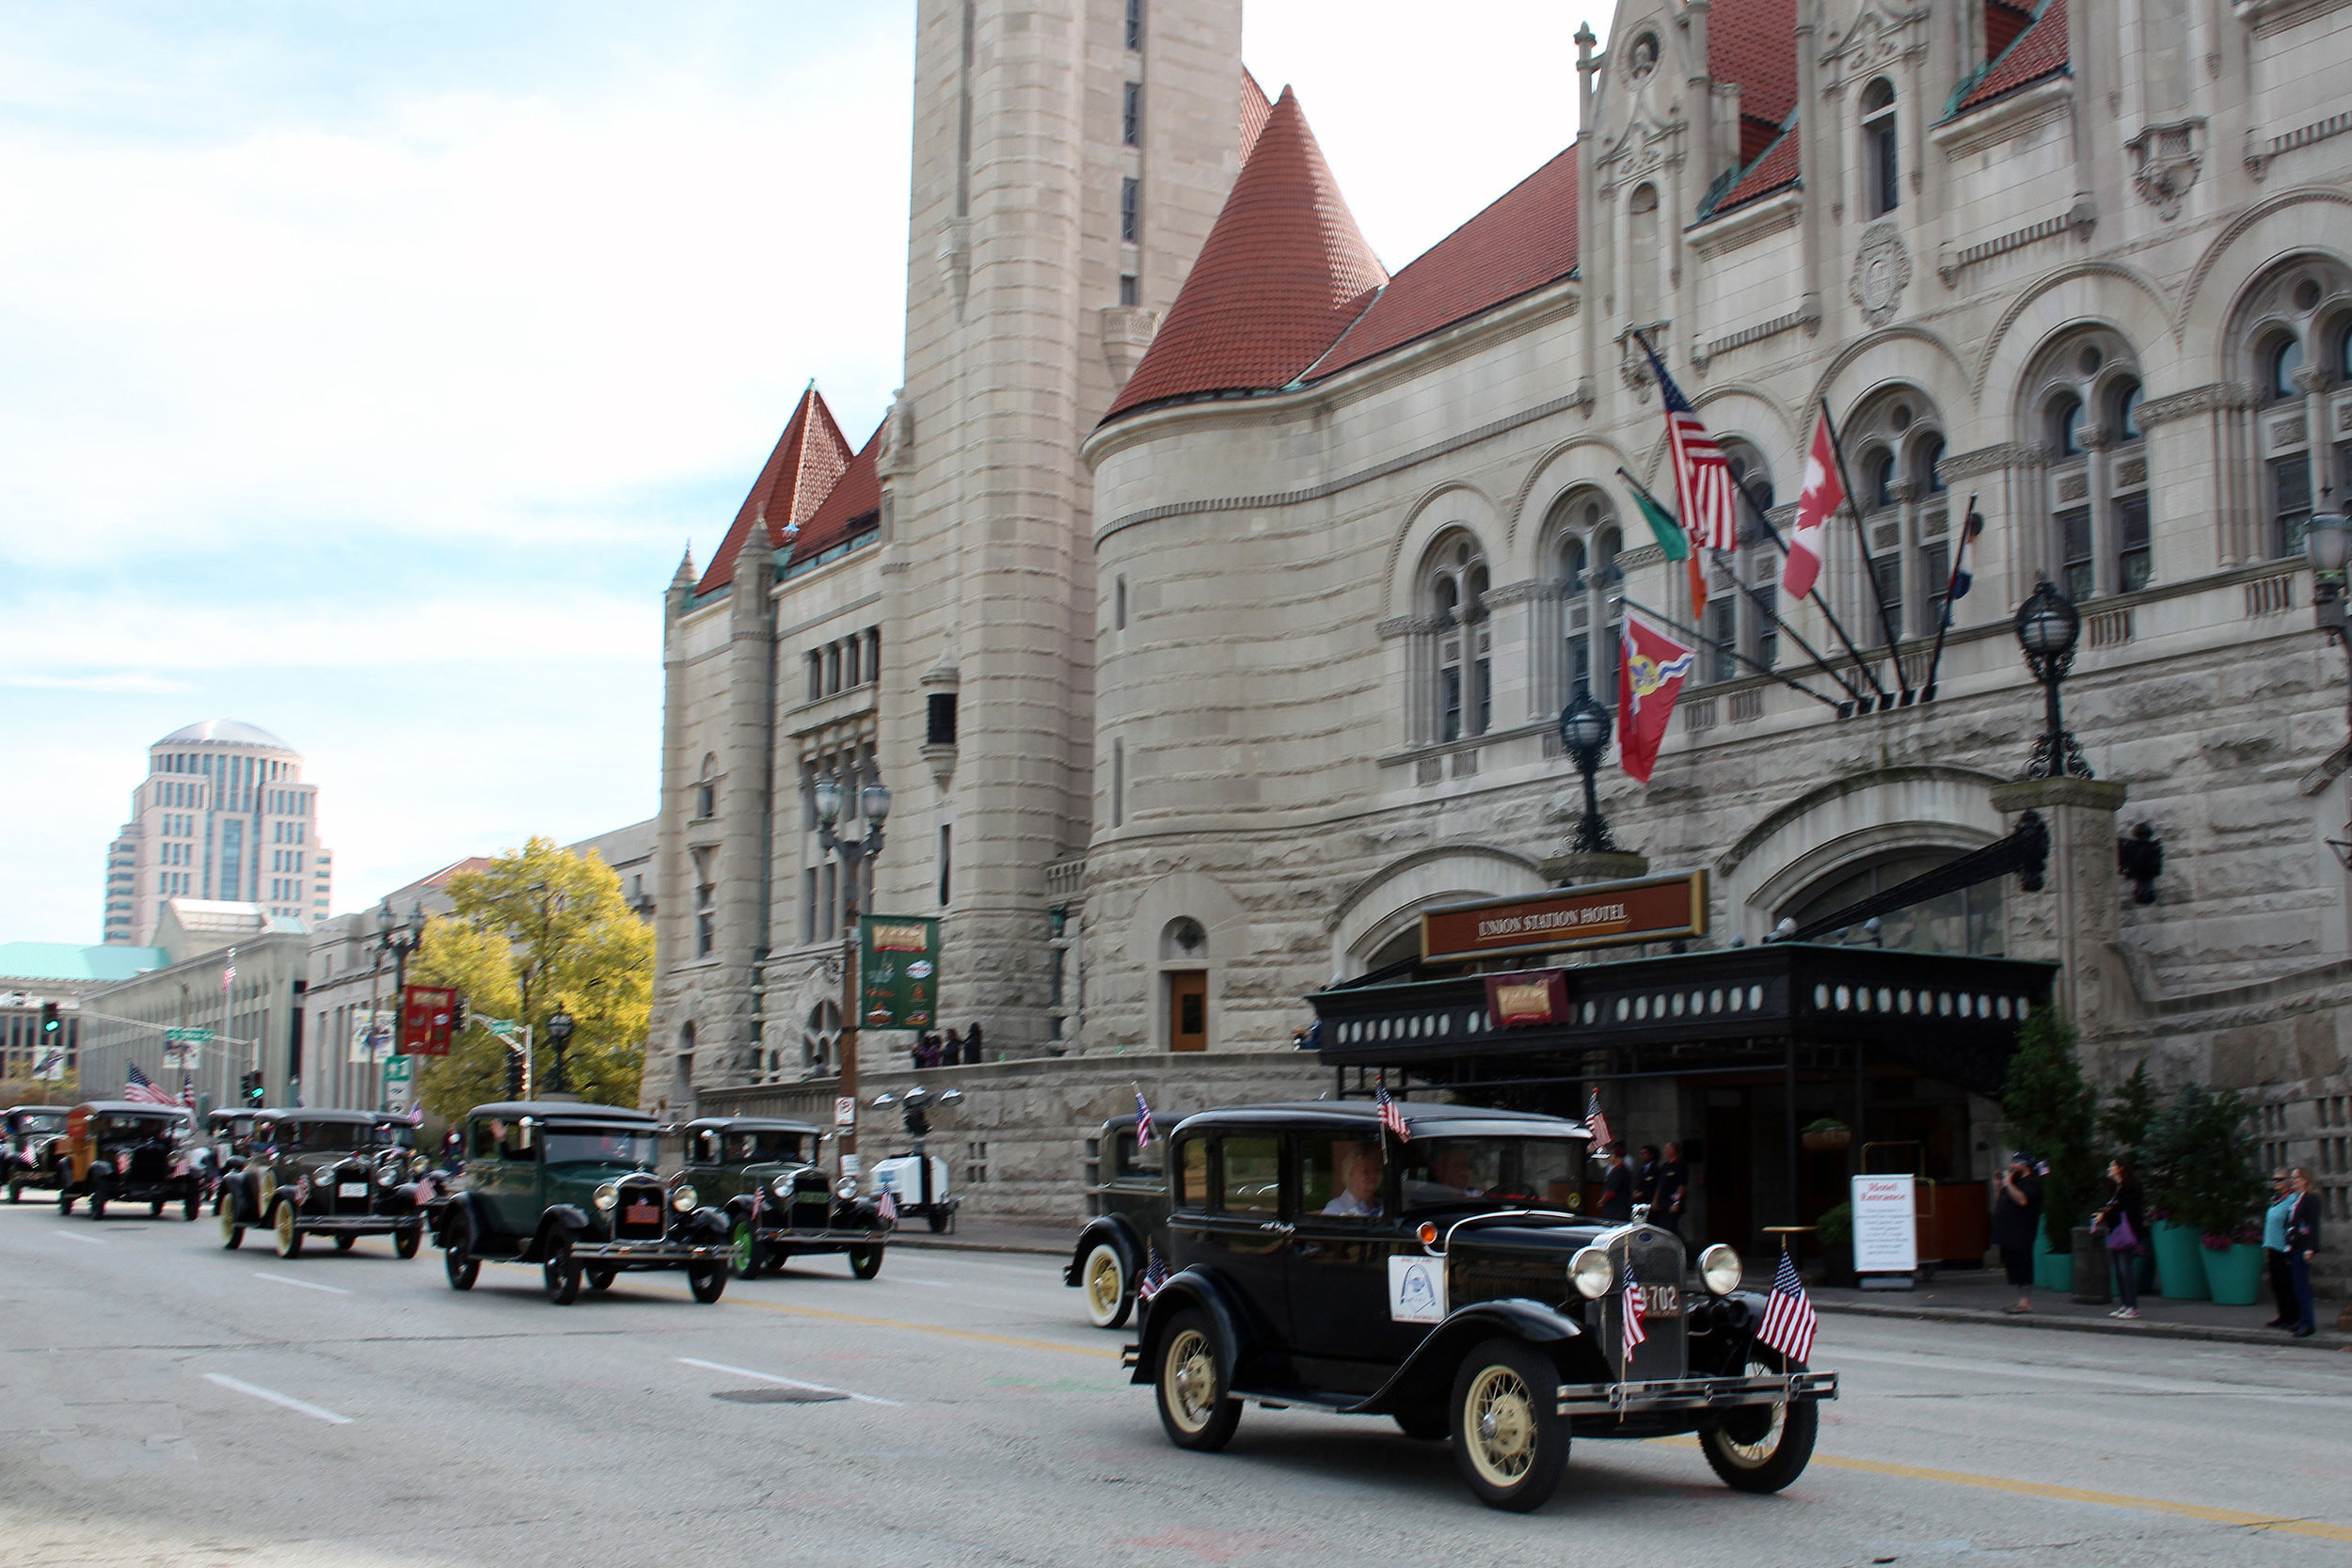  Model A's parading in front of Union Station in St. Louis, MO 